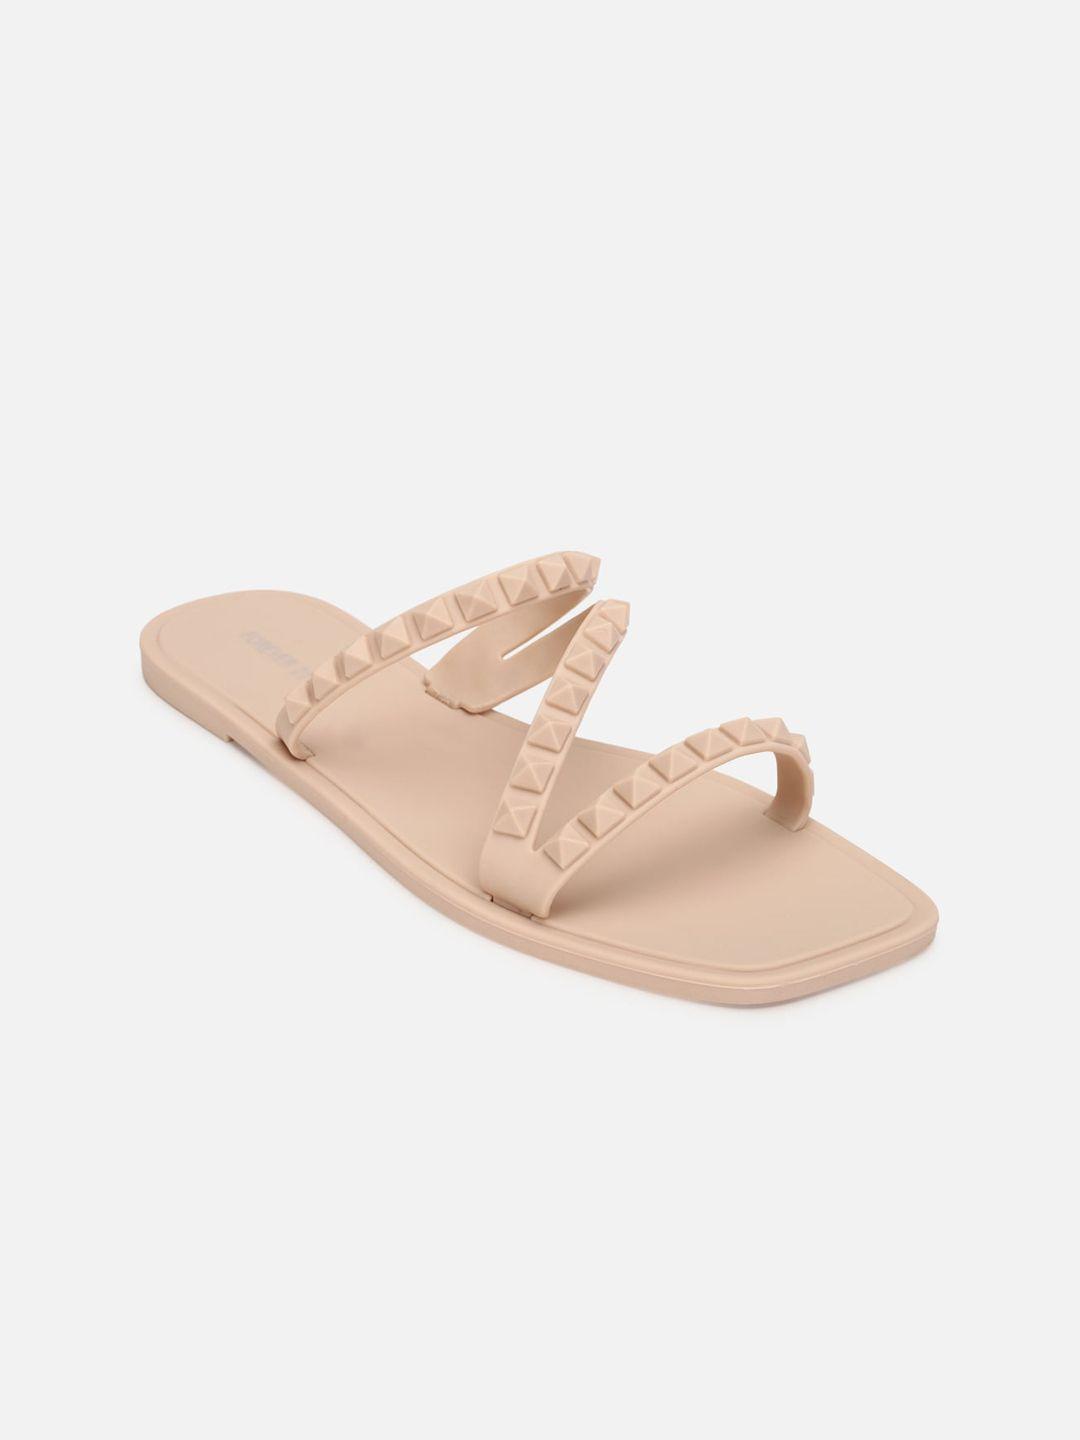 forever-21-women-peach-coloured-embellished-open-toe-flats